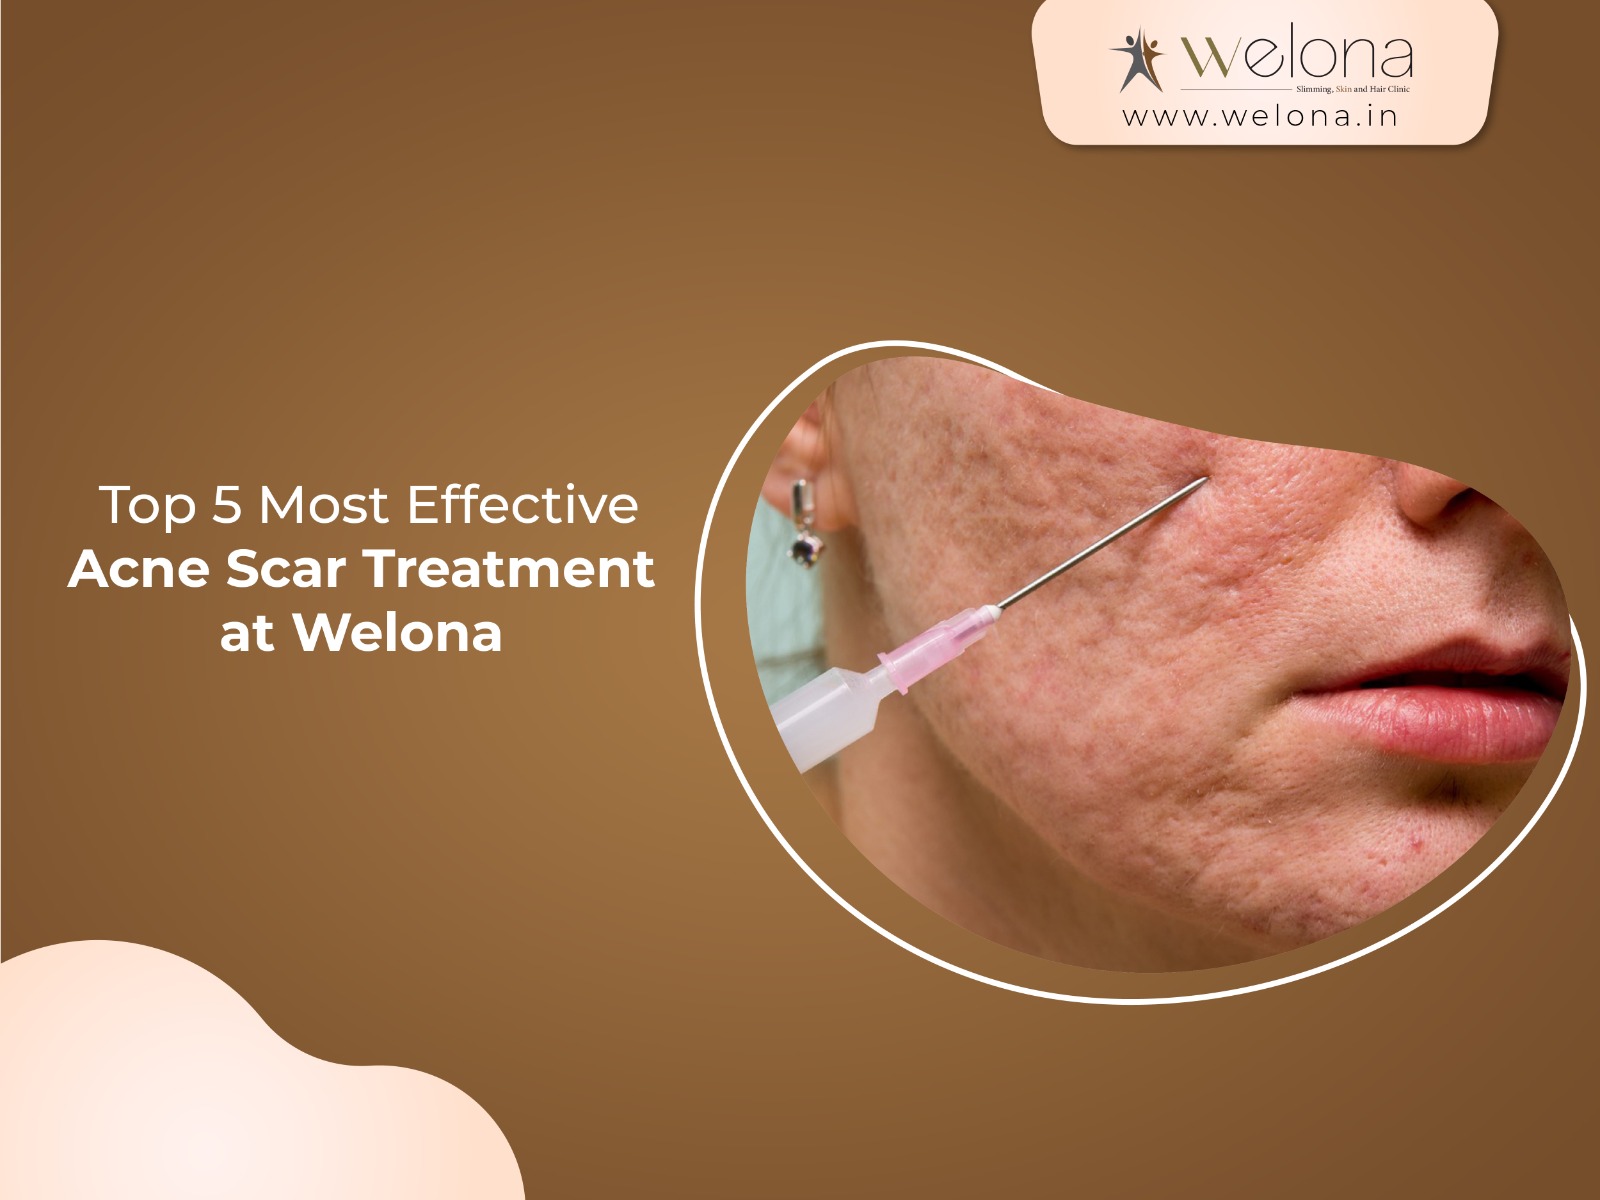 Top 5 Most Effective Acne Scar Treatments at Welona